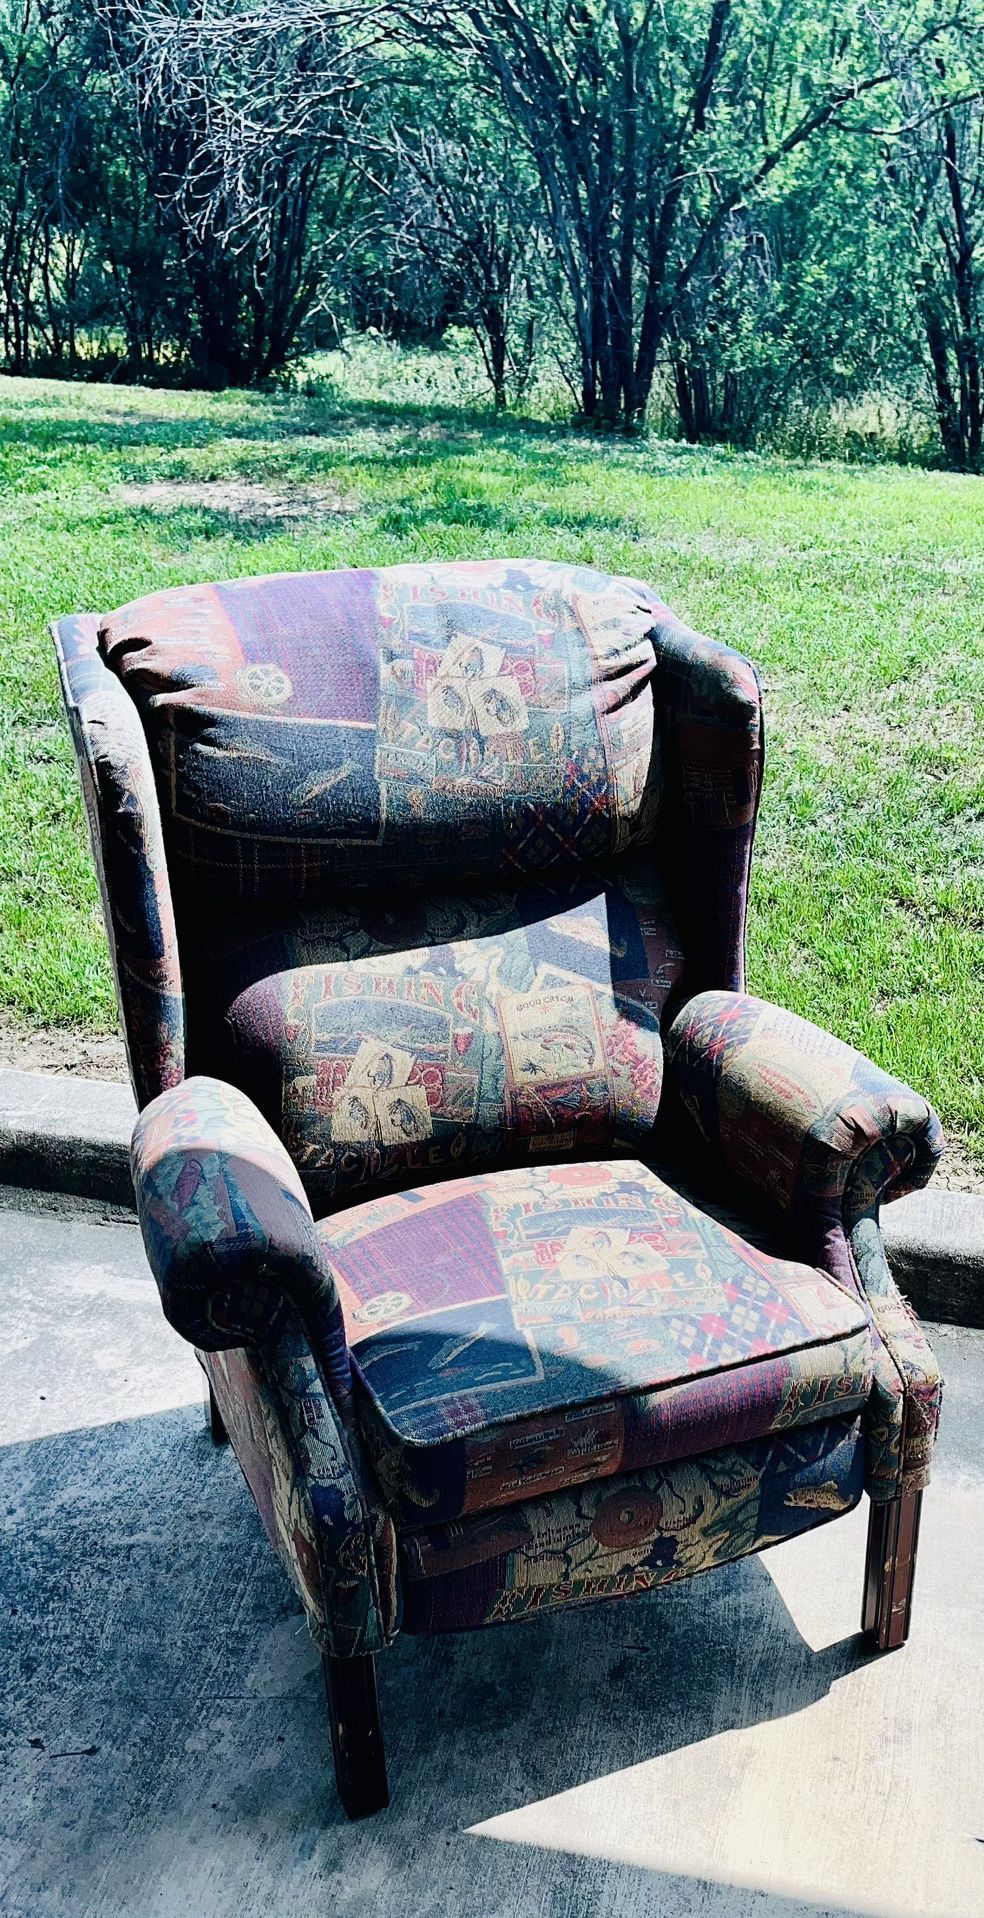 LAZBOY “OUTDOOR LOVERS” RECLINER! ARMCHAIR & FULLY LAID BACK RECLINER! UNDER LEG EXTENSION SEALED FABRIC REPLACEMENT CUTS TO FRESHEN & REPAIR CHAIR 🪑